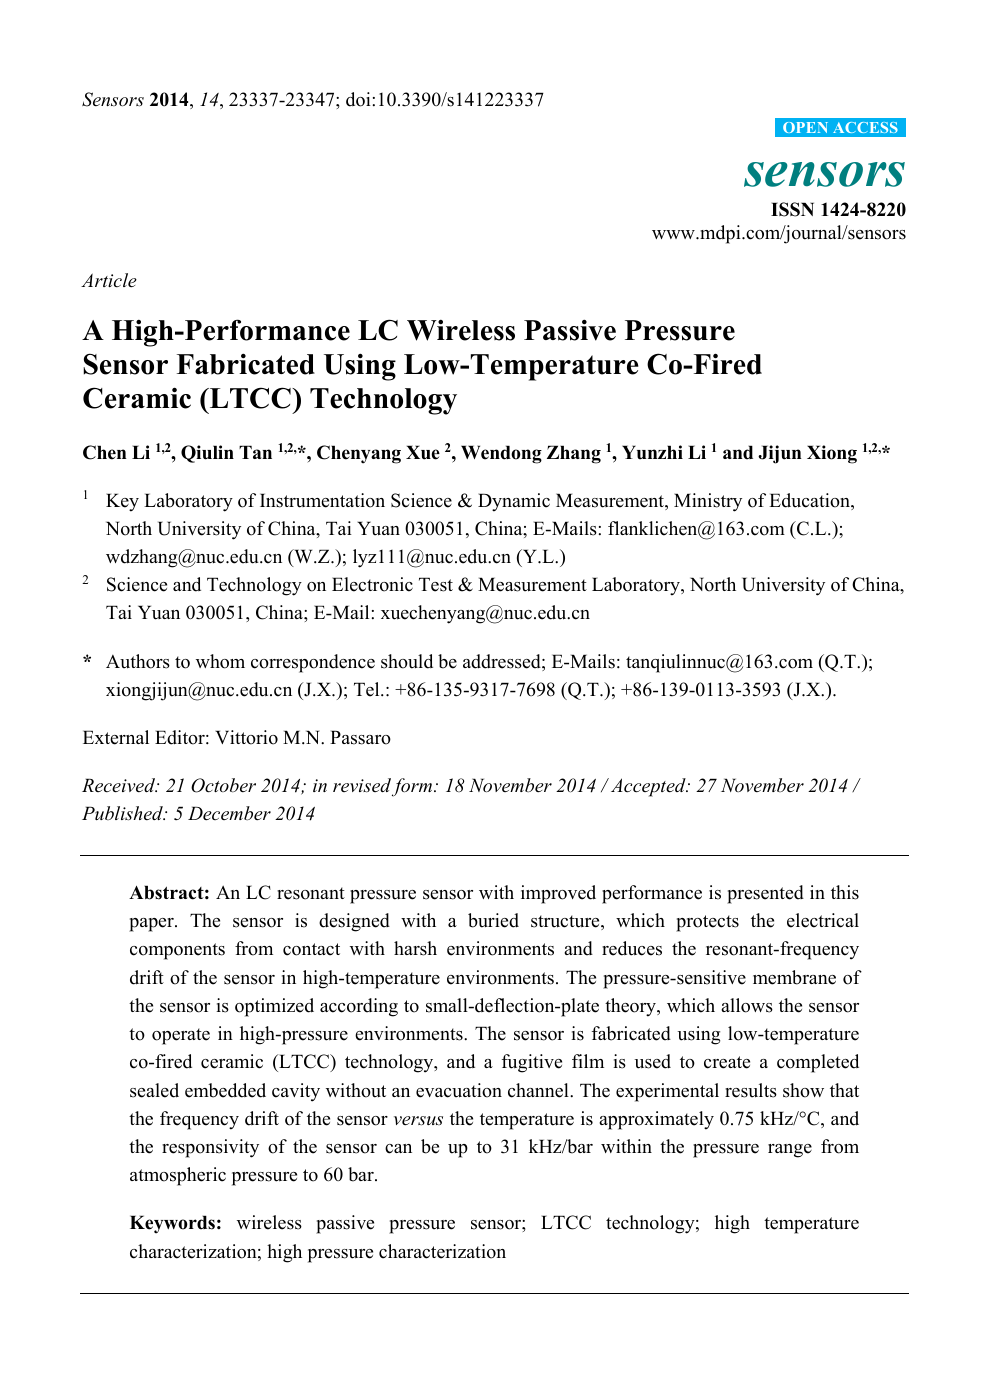 A High Performance Lc Wireless Passive Pressure Sensor Fabricated Using Low Temperature Co Fired Ceramic Ltcc Technology Topic Of Research Paper In Nano Technology Download Scholarly Article Pdf And Read For Free On Cyberleninka Open